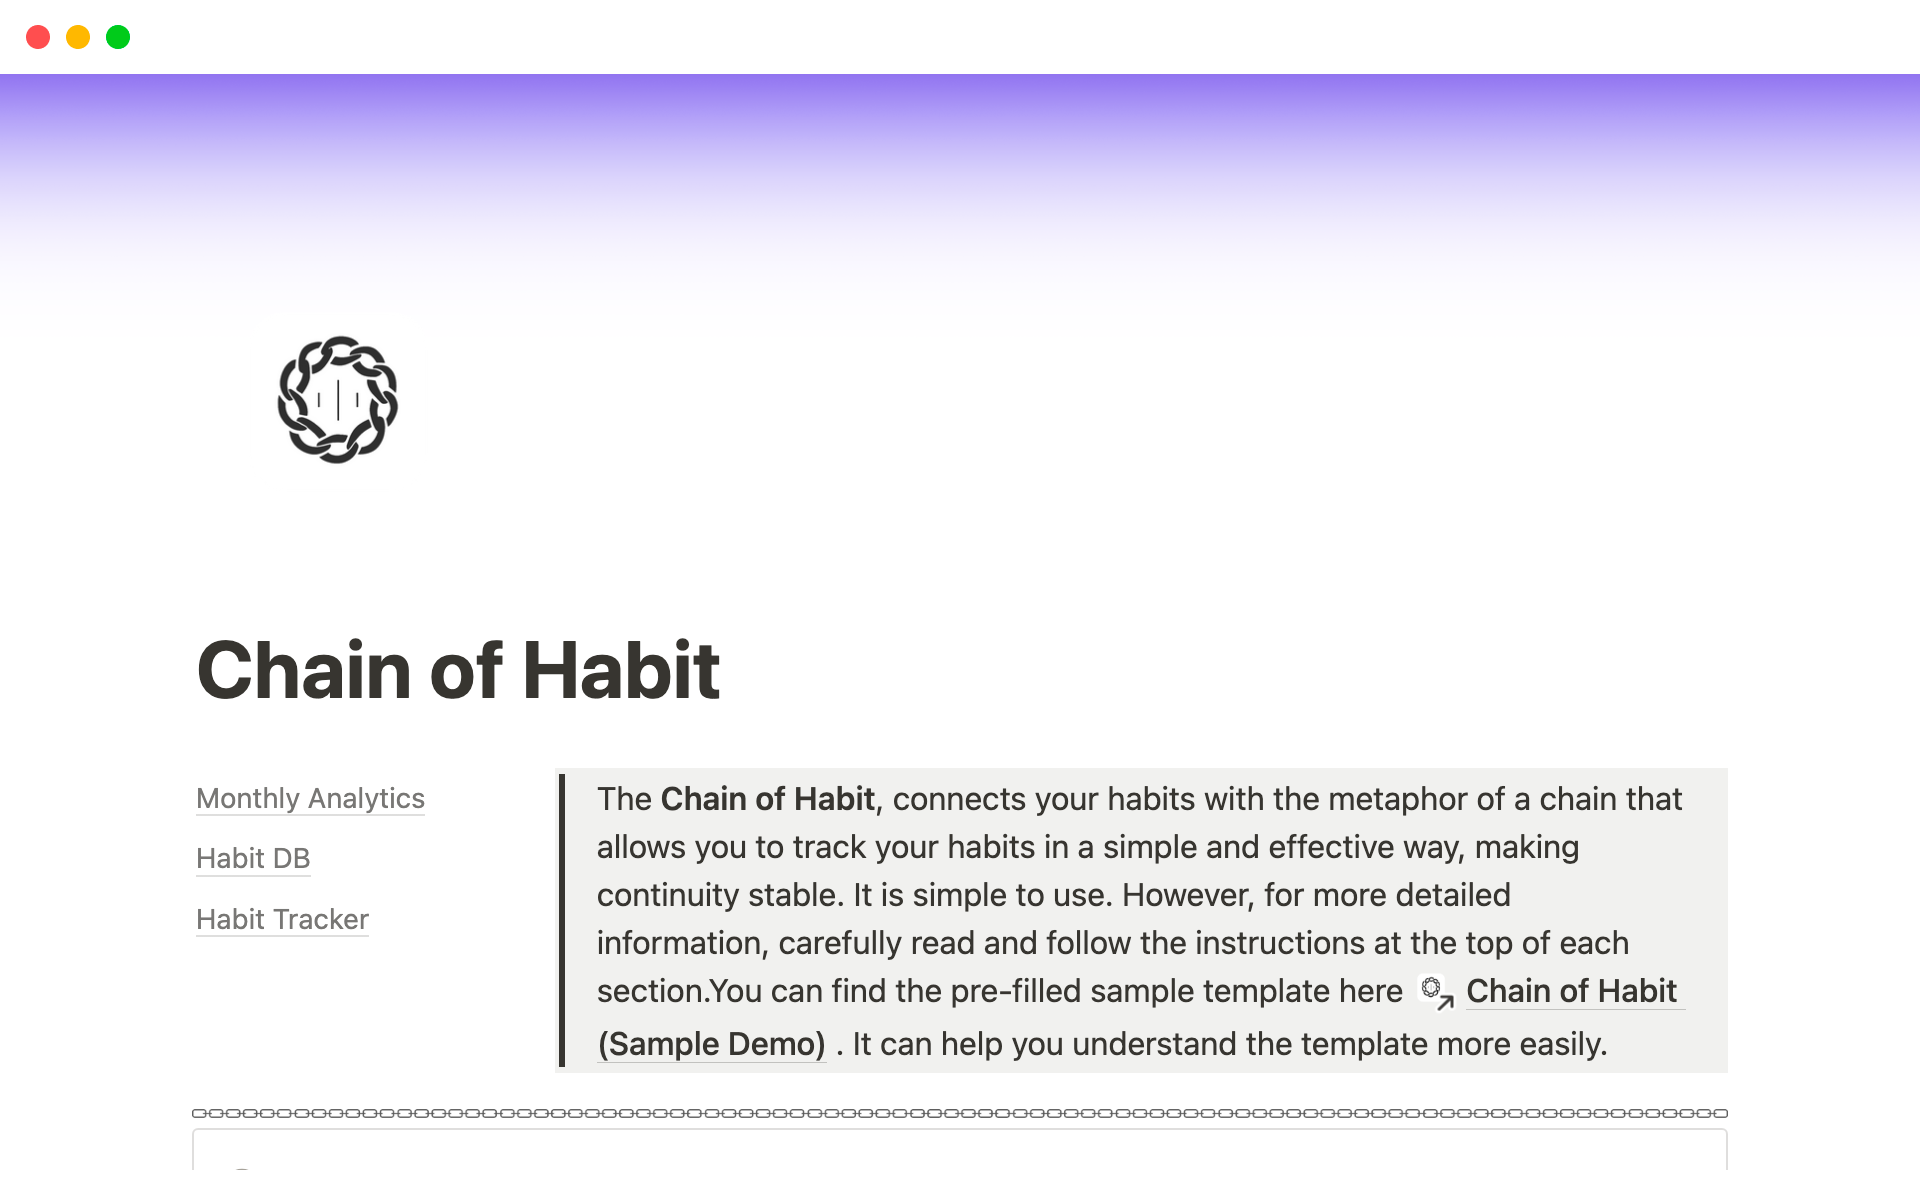 Introducing Chain of Habit, the ultimate digital companion that revolutionizes the way you build and maintain habits. Unleash the potential within you and unlock the key to lasting personal growth.